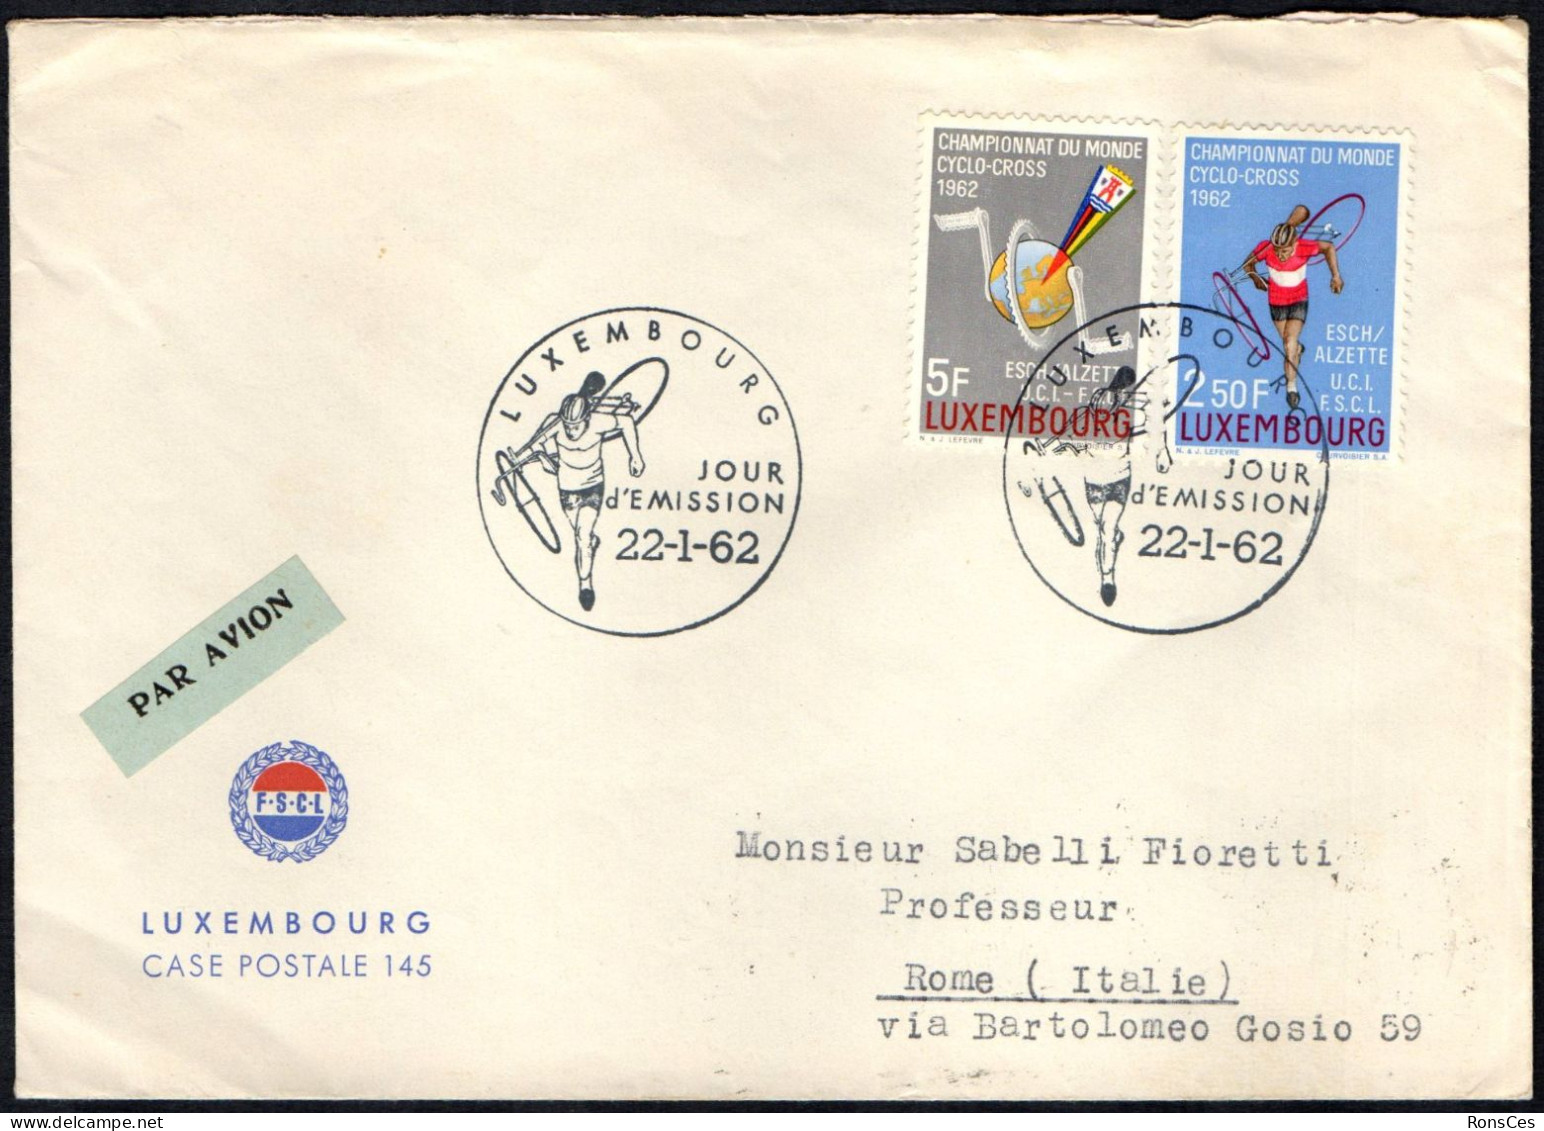 CYCLING - LUXEMBOURG 1962 - CHAMPIONNAT DU MONDE CYCLO-CROSS - MAILED FDC - A - Radsport